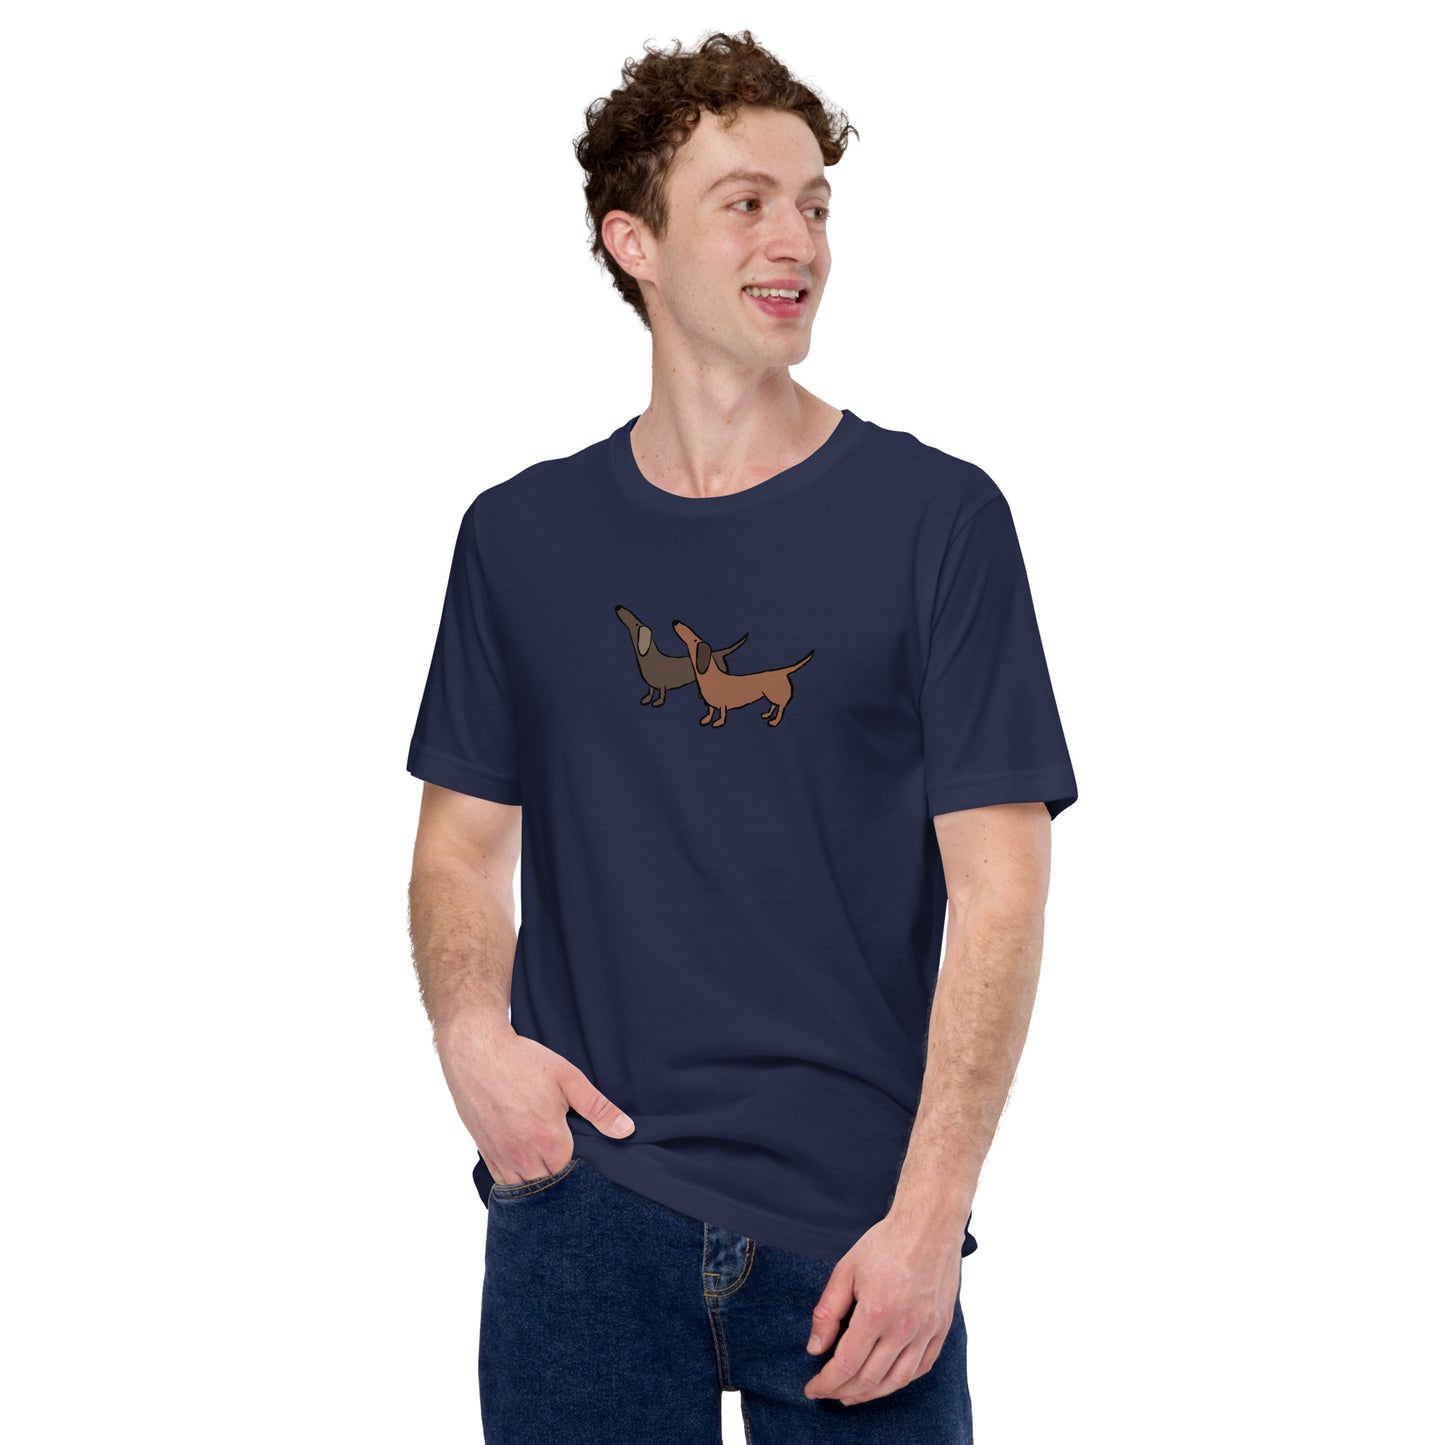 Bella + Canvas unisex t-shirt with Two Dachshunds design